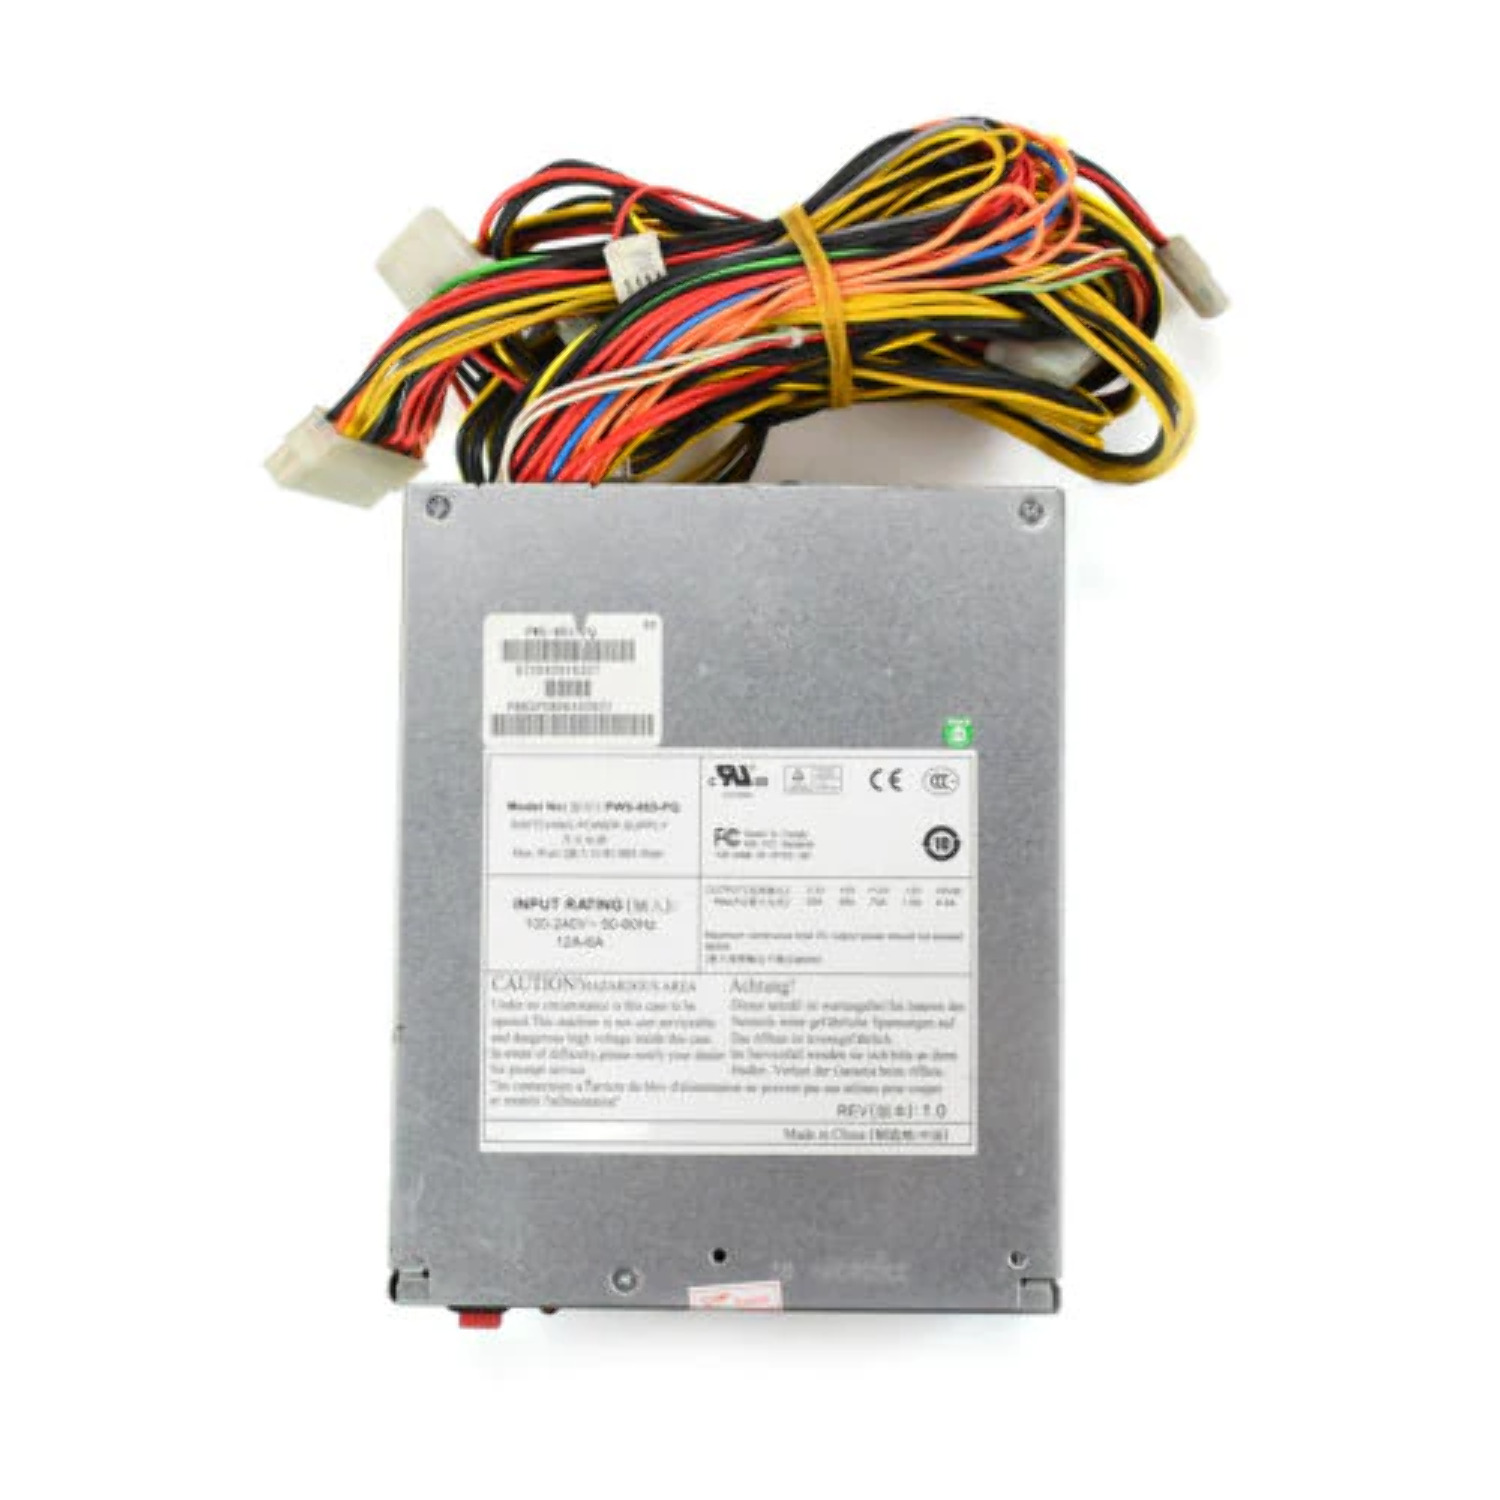 For SuperMicro PWS-865-PQ 865W Power Supply for Tower Workstation Fonte - image 1 of 11